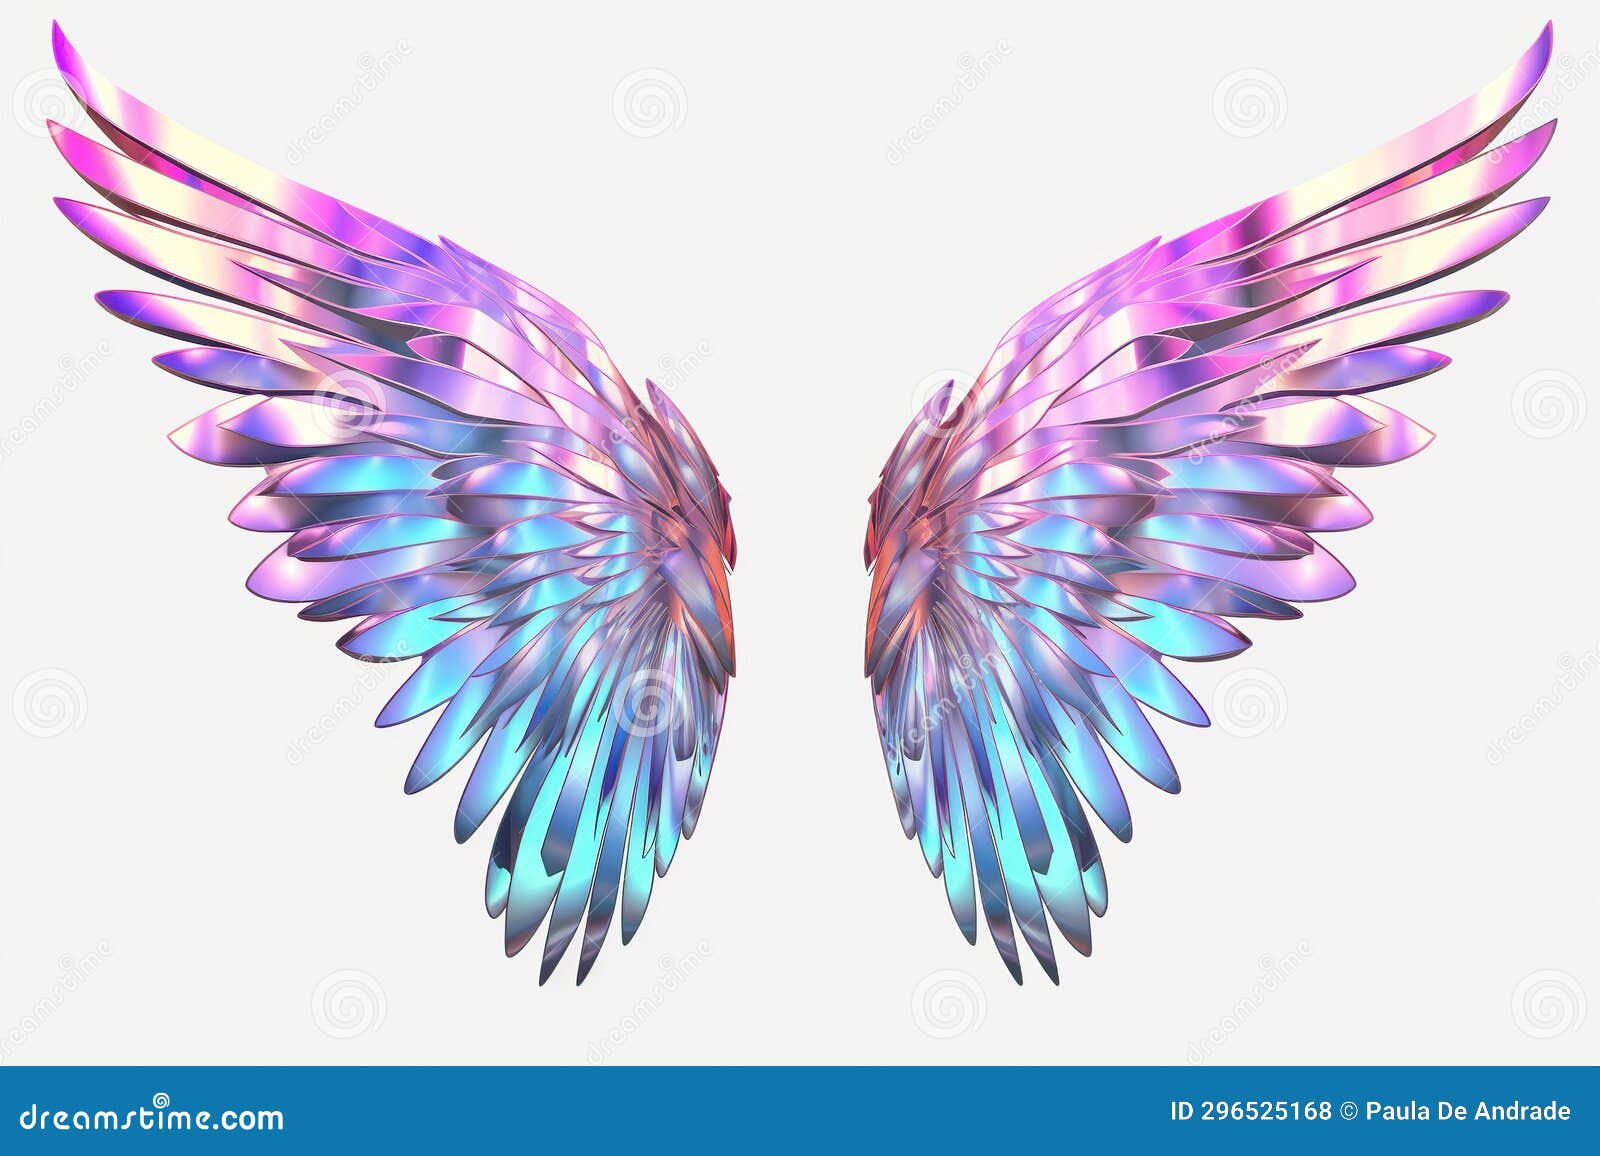 5,380 Angel Wing Clipart Images, Stock Photos, 3D objects